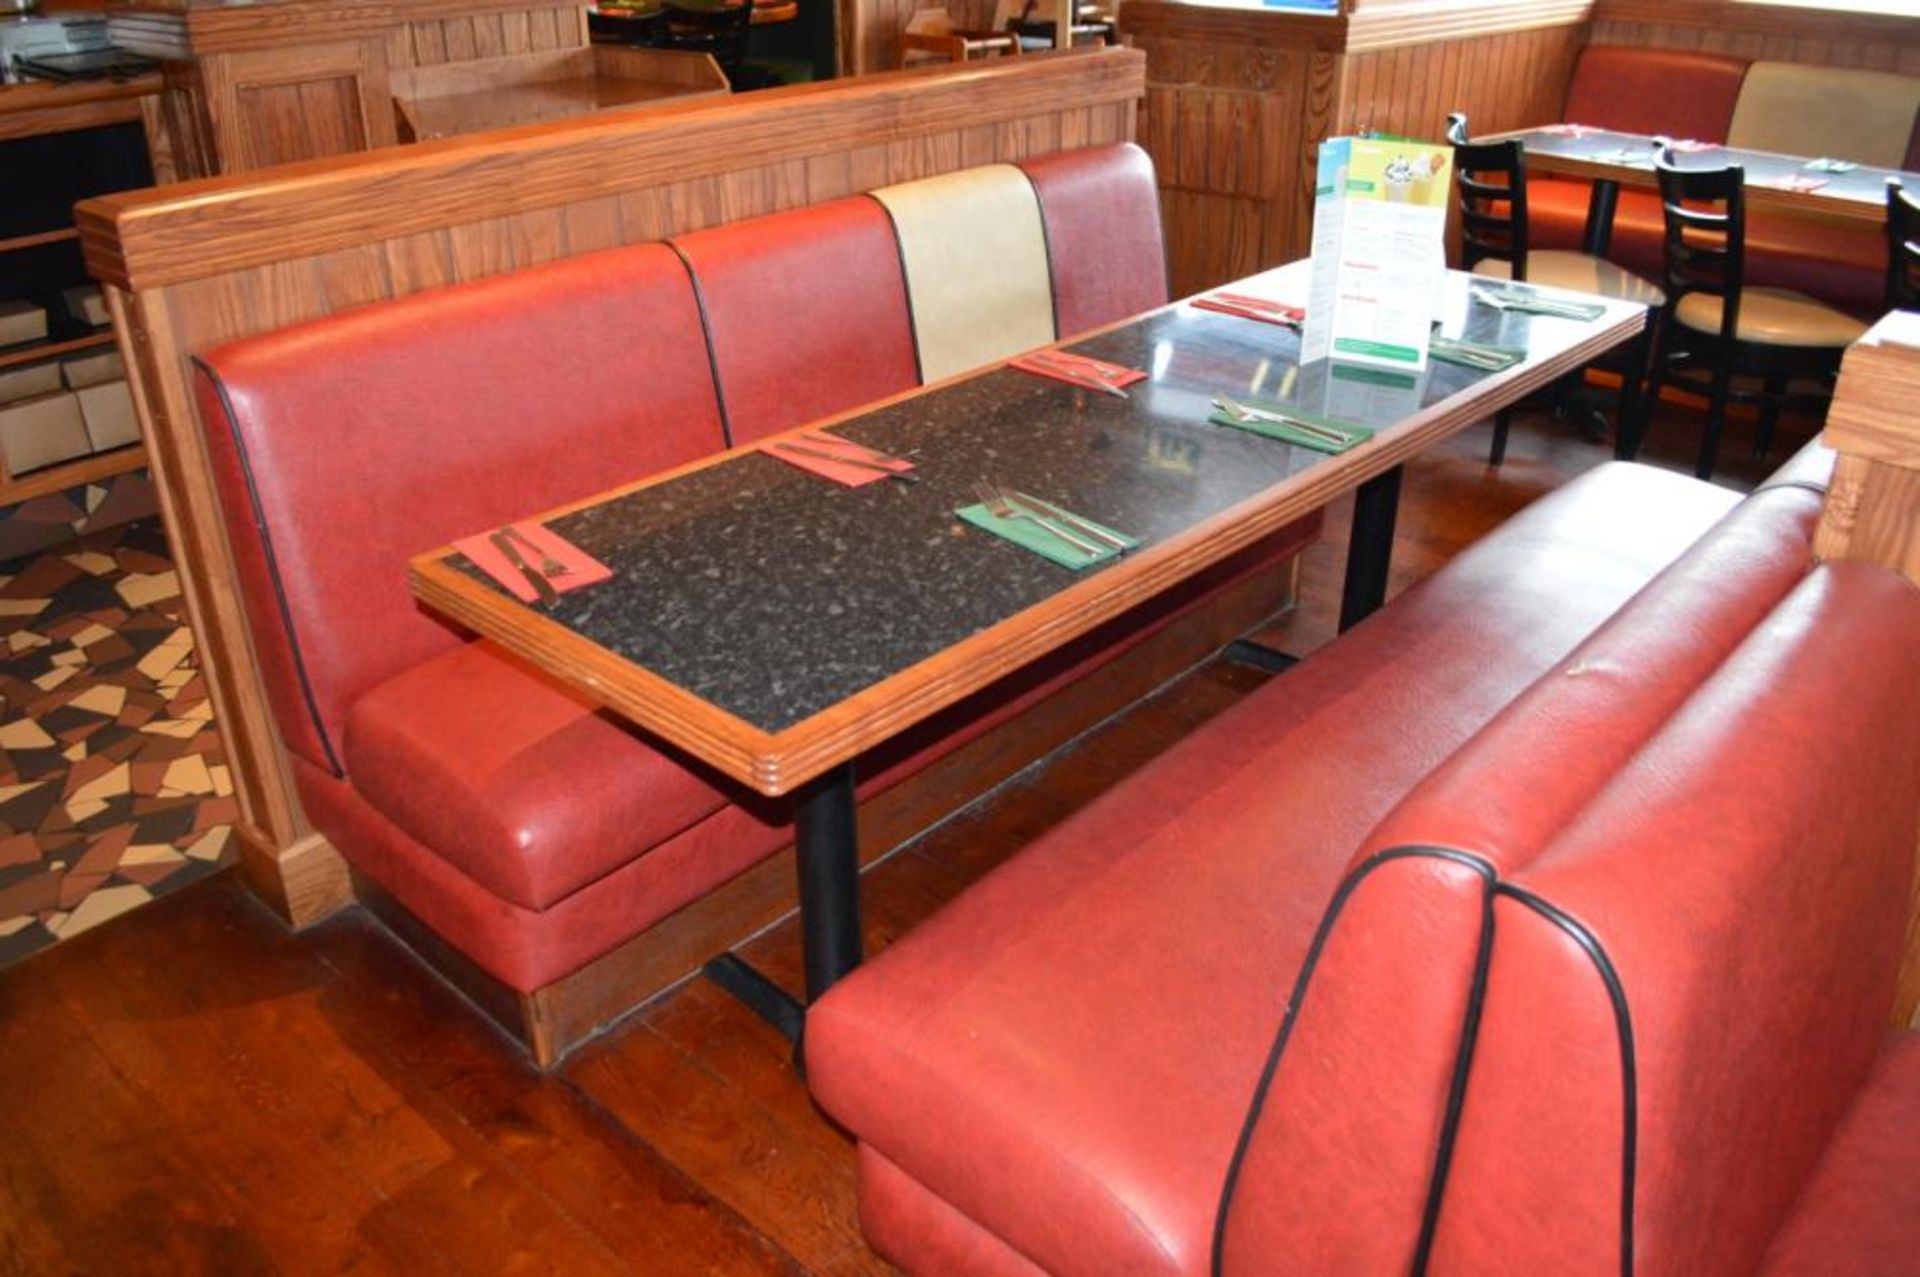 1 x Selection of Cosy Bespoke Seating Booths in a 1950's Retro American Diner Design With Dining Tab - Image 18 of 30